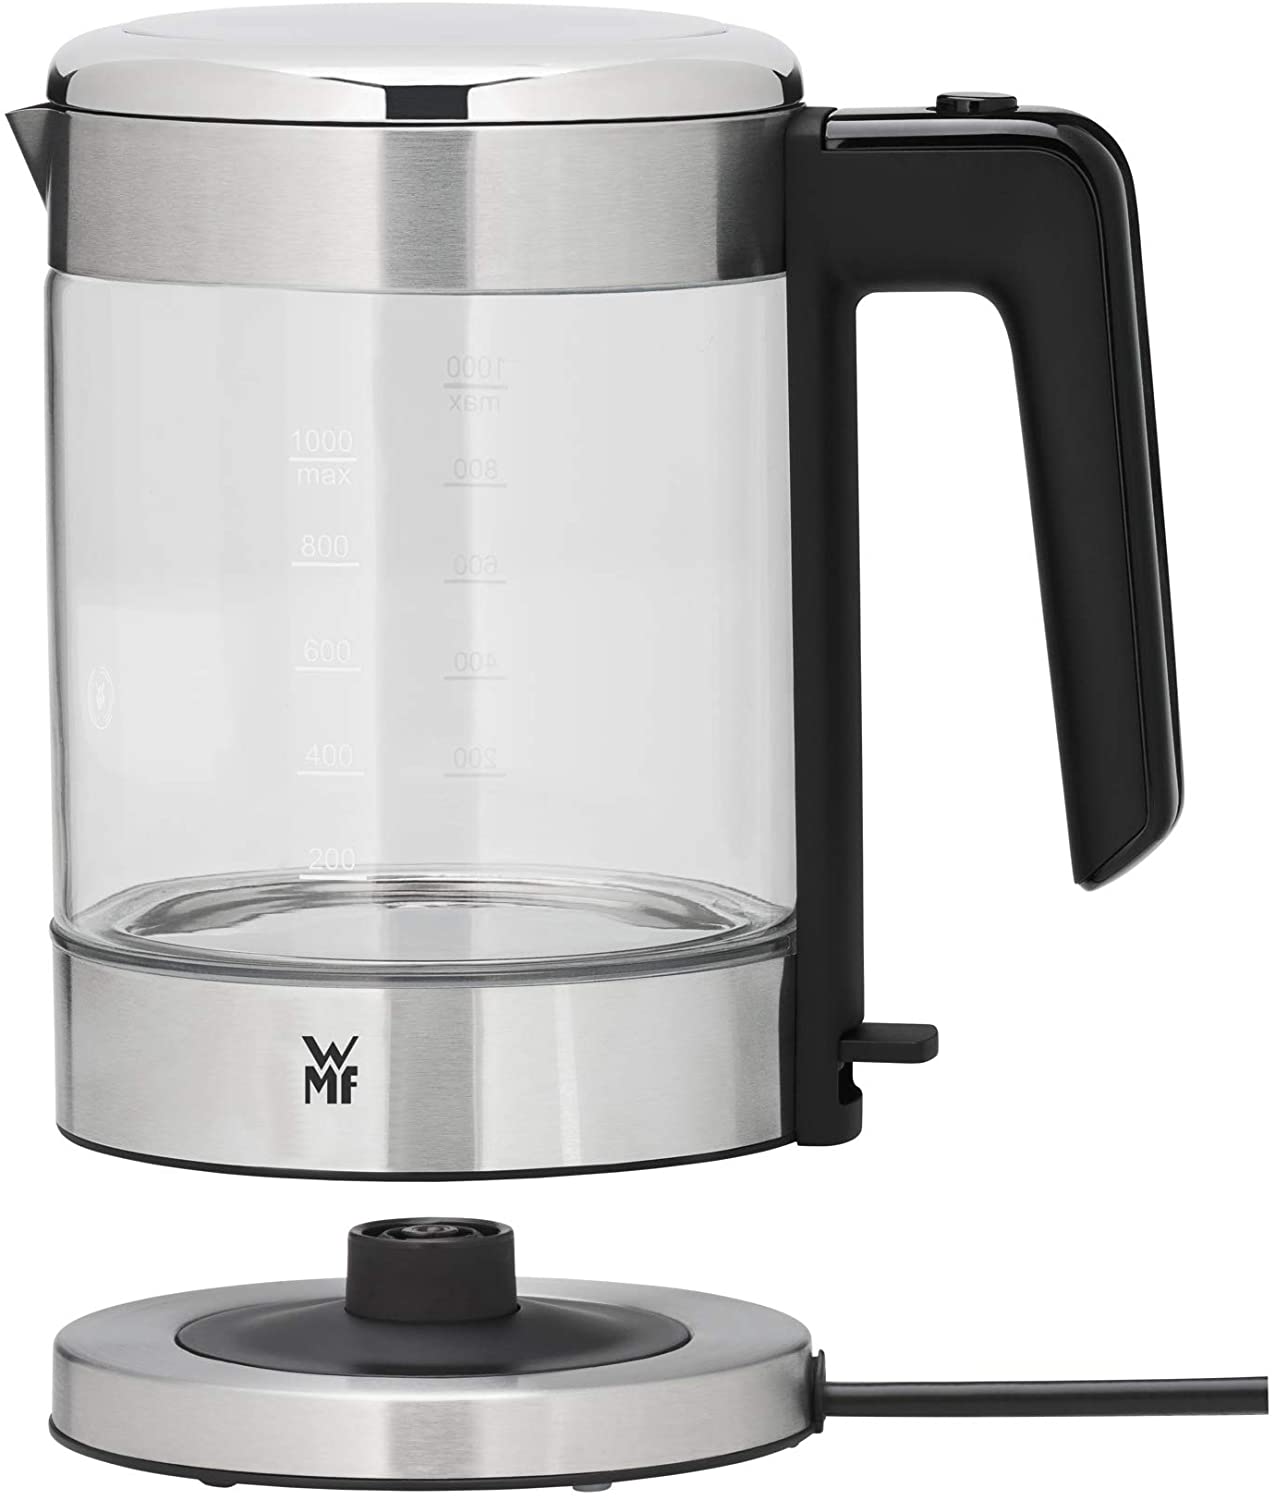 WMF Küchenminis Glass Kettle (1900 Watt, 1.0 Litre, Cordless, Water Level Indicator, Limescale Water Filter, Automatic Cooking Stop)